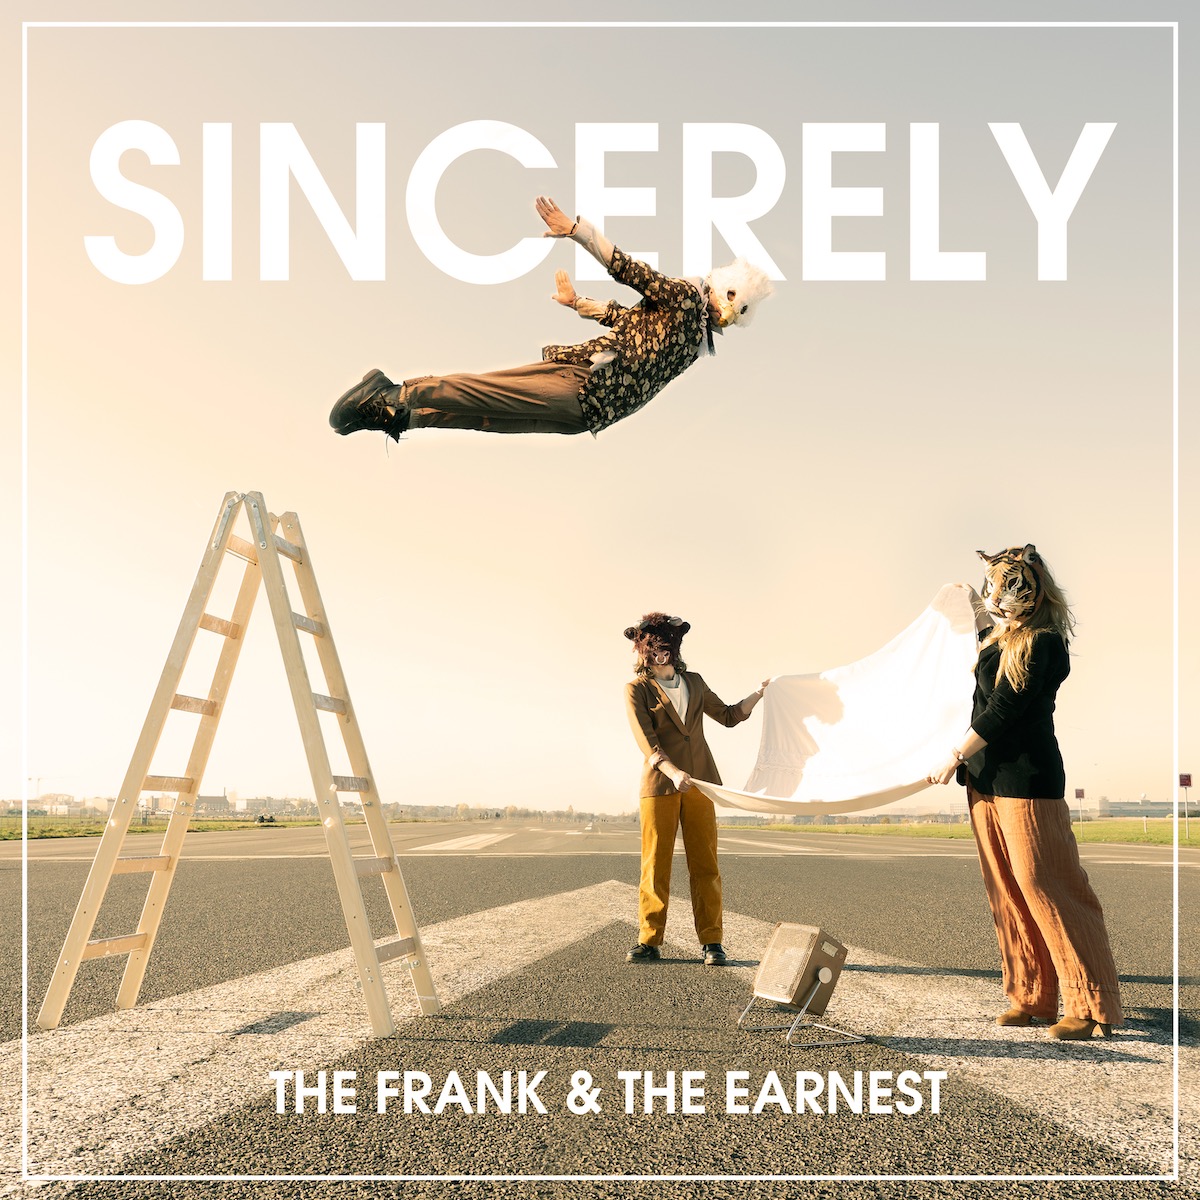 Sincerly - The new record by The Frank & The Earnest